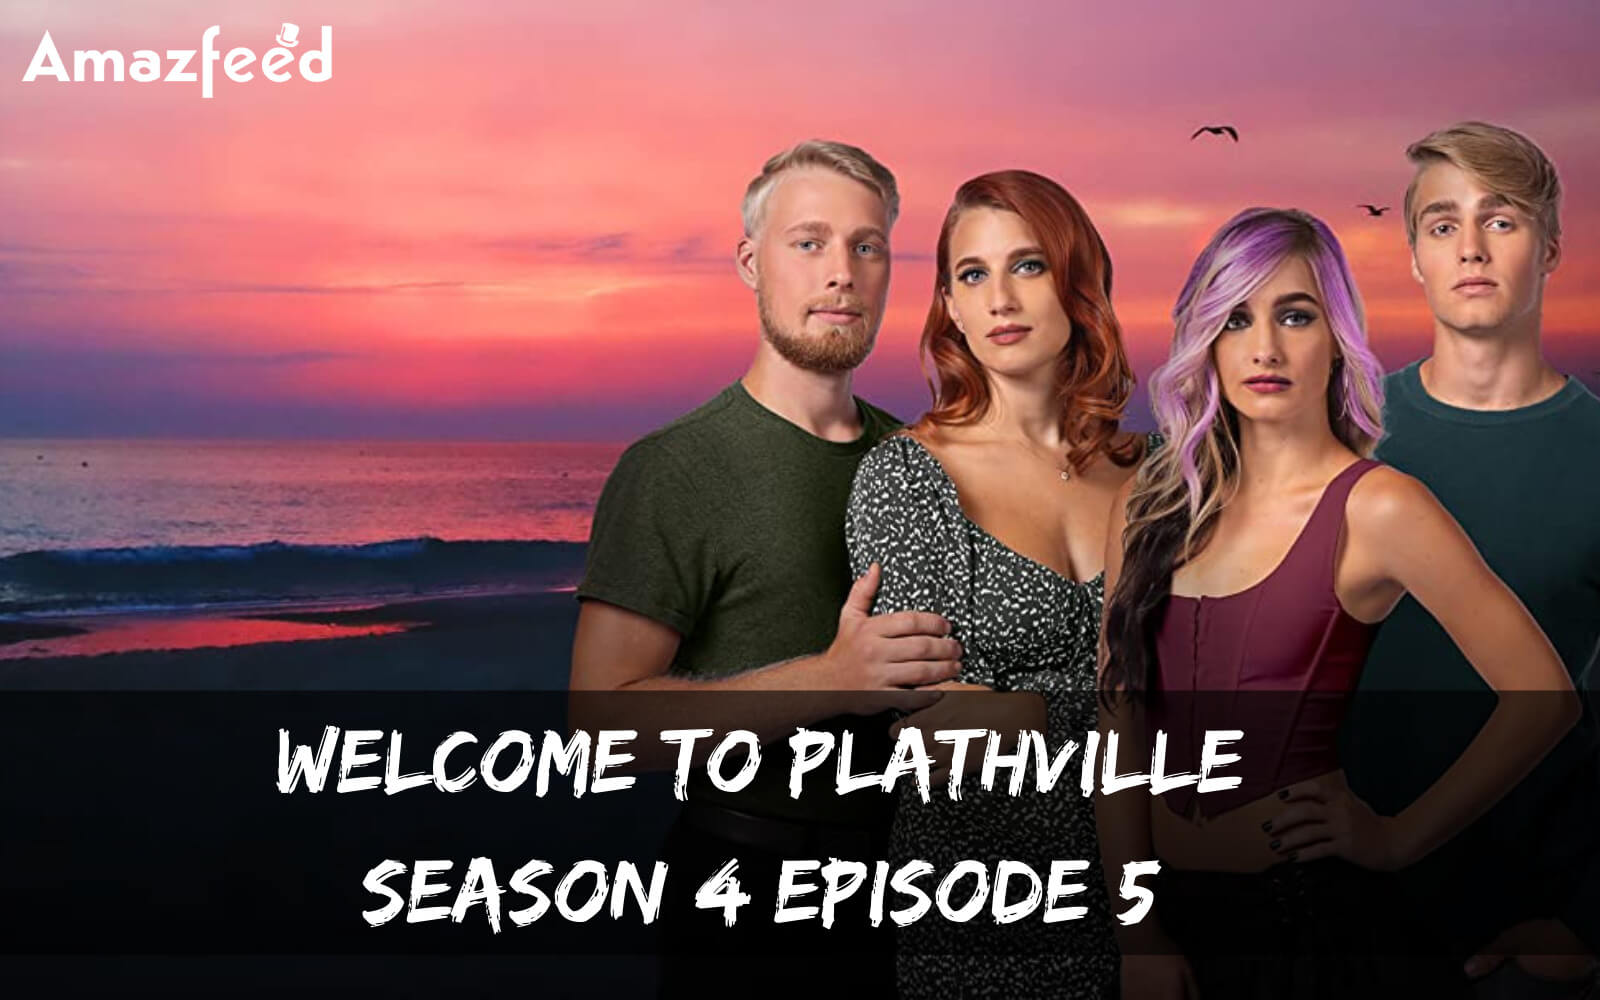 Welcome to Plathville season 4 Episode 5 release date